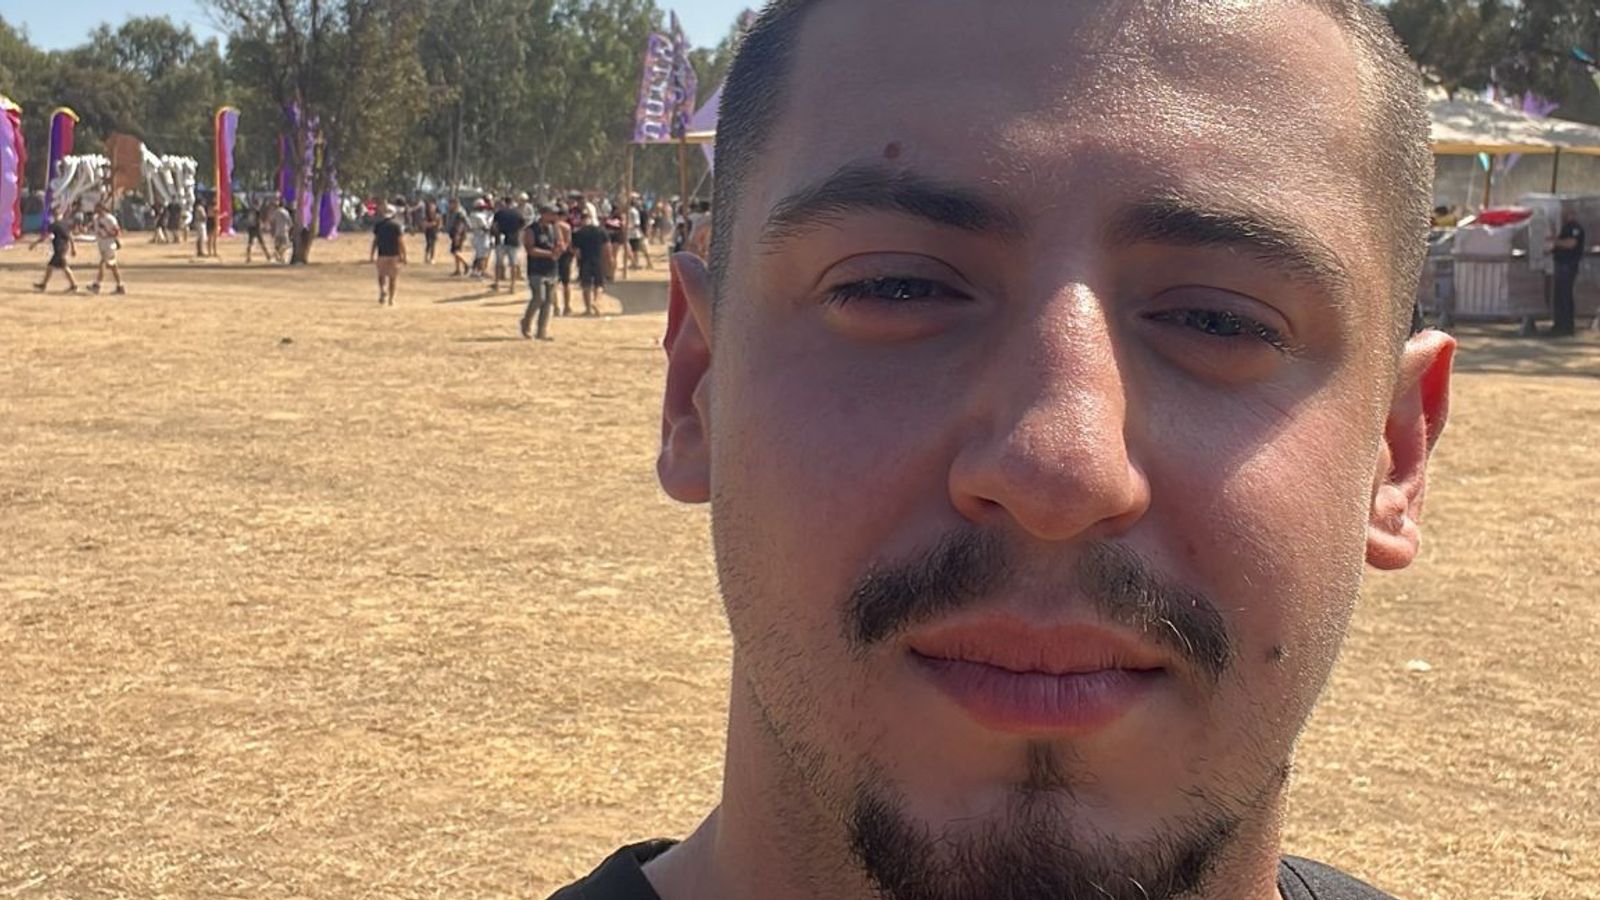 Jake Marlowe: British man missing after Hamas attack on music festival in Israel, says embassy